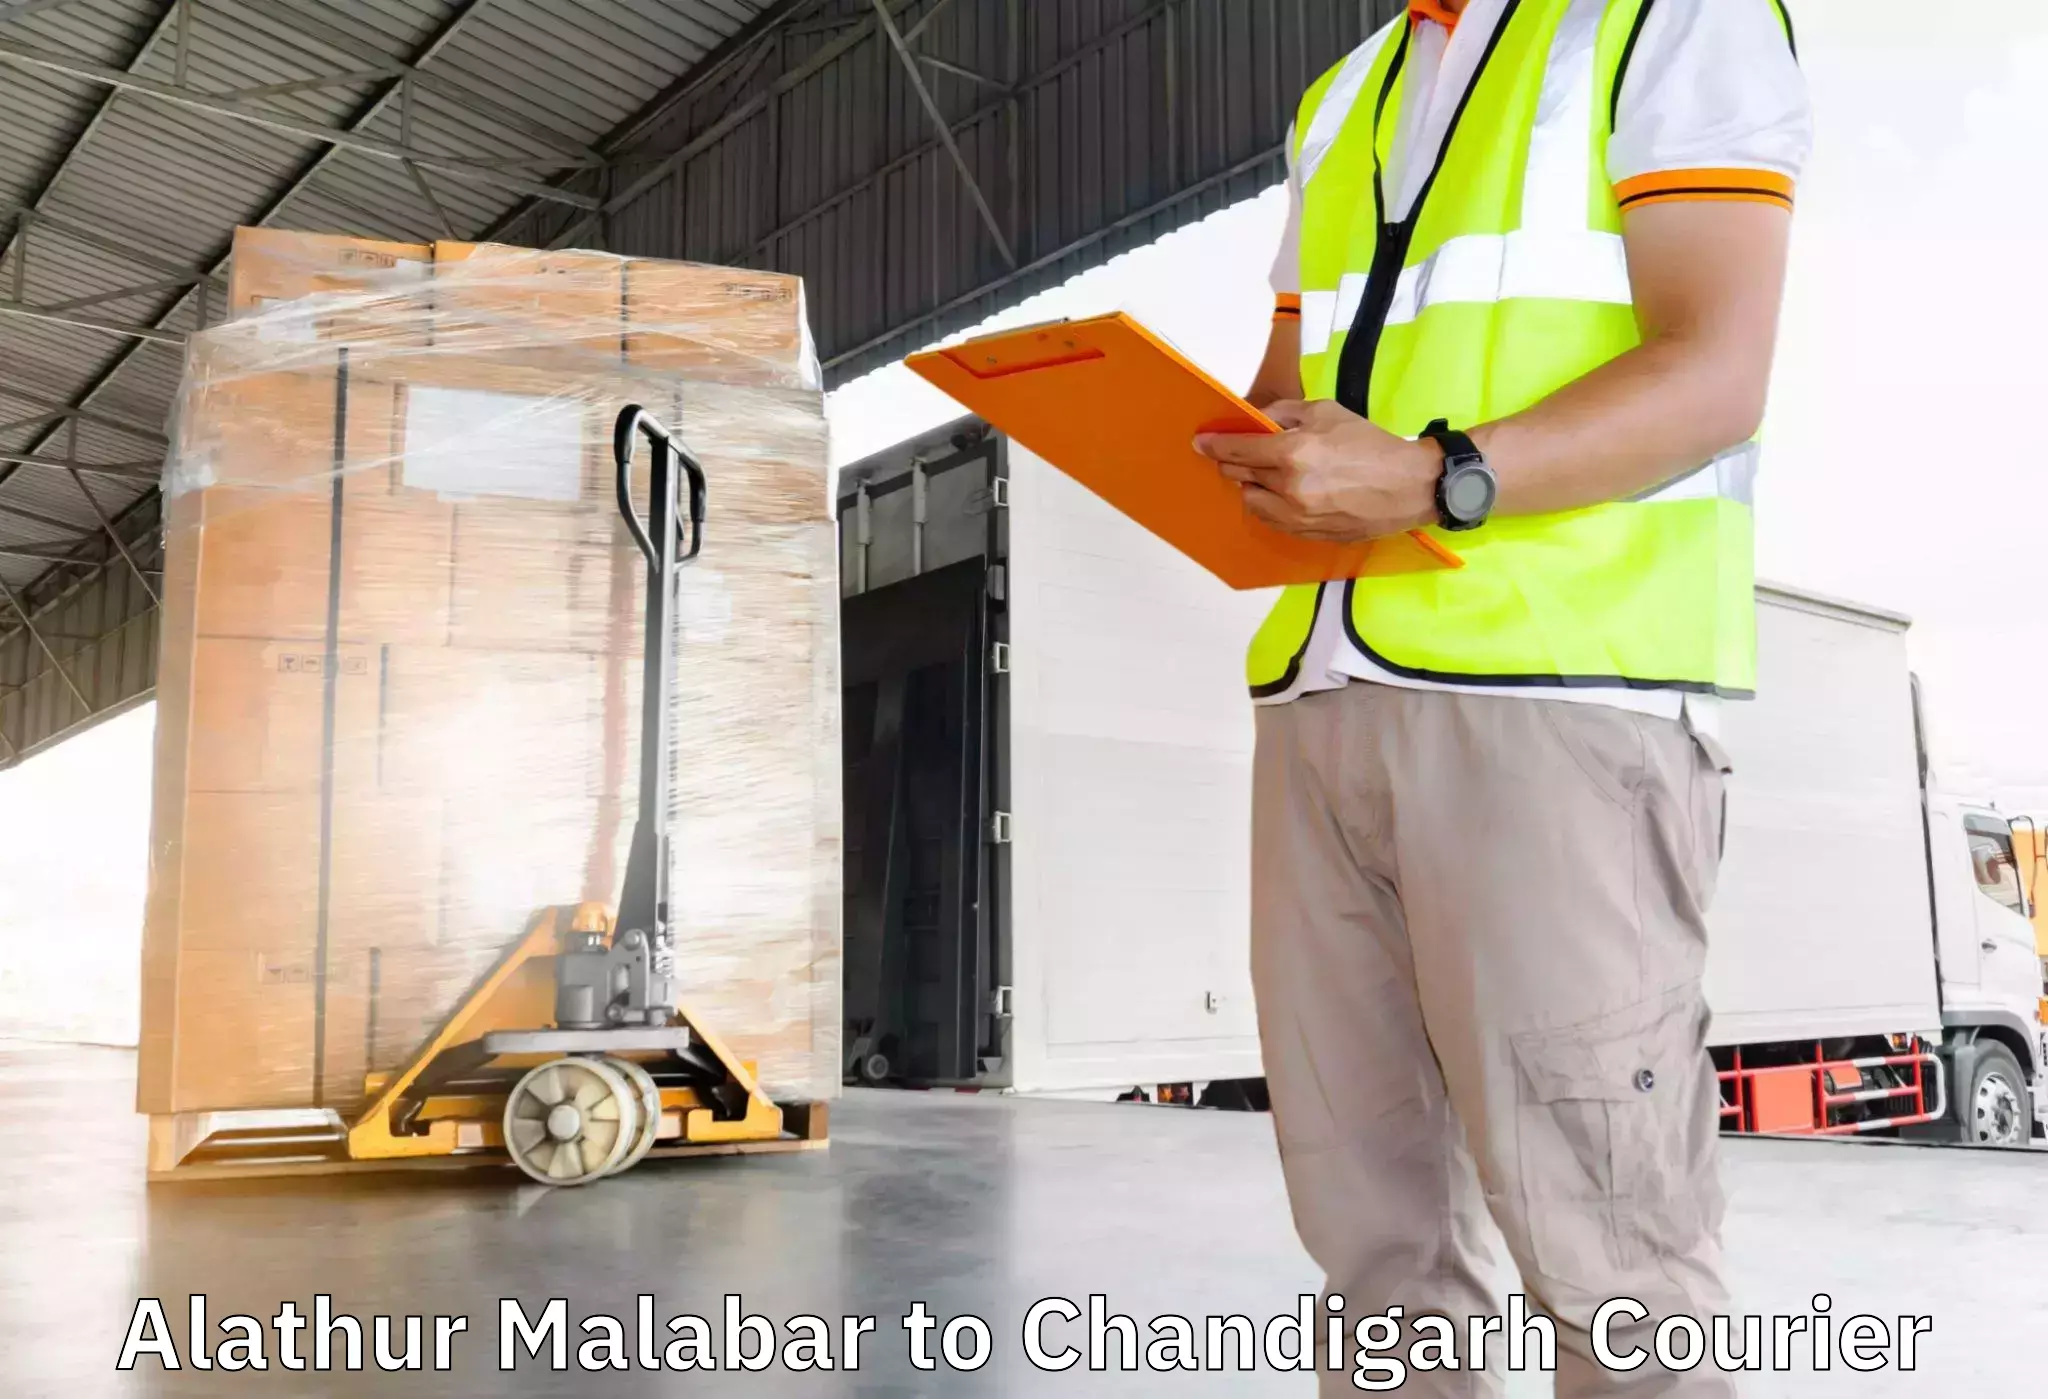 Furniture moving service in Alathur Malabar to Chandigarh